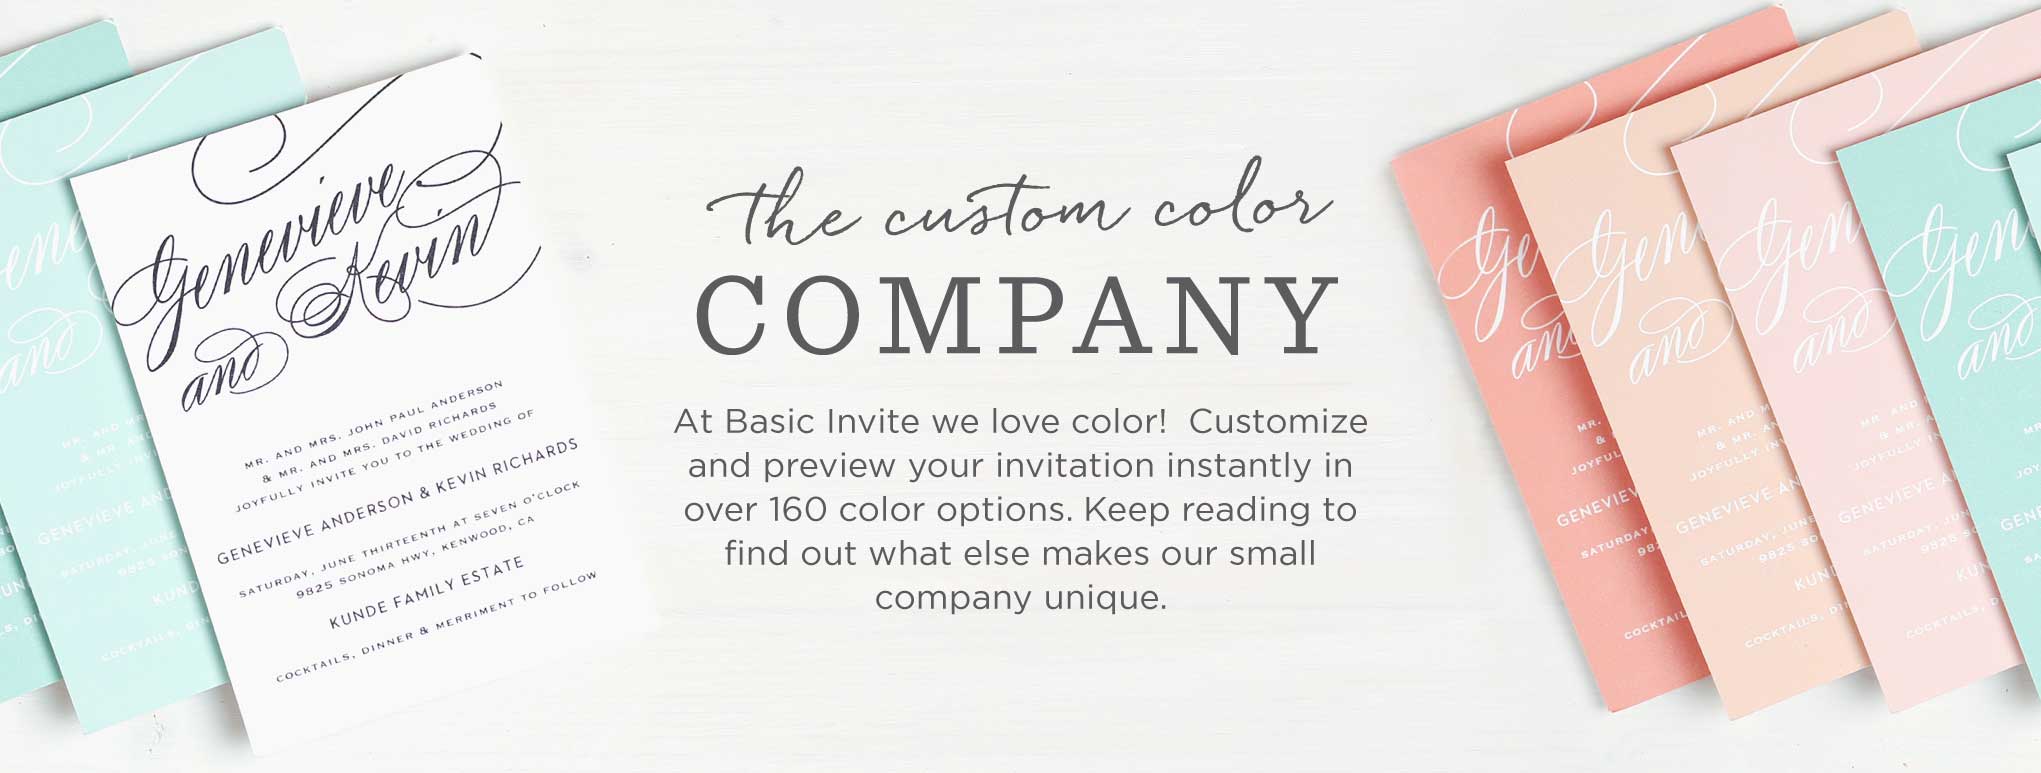 About Basic Invite